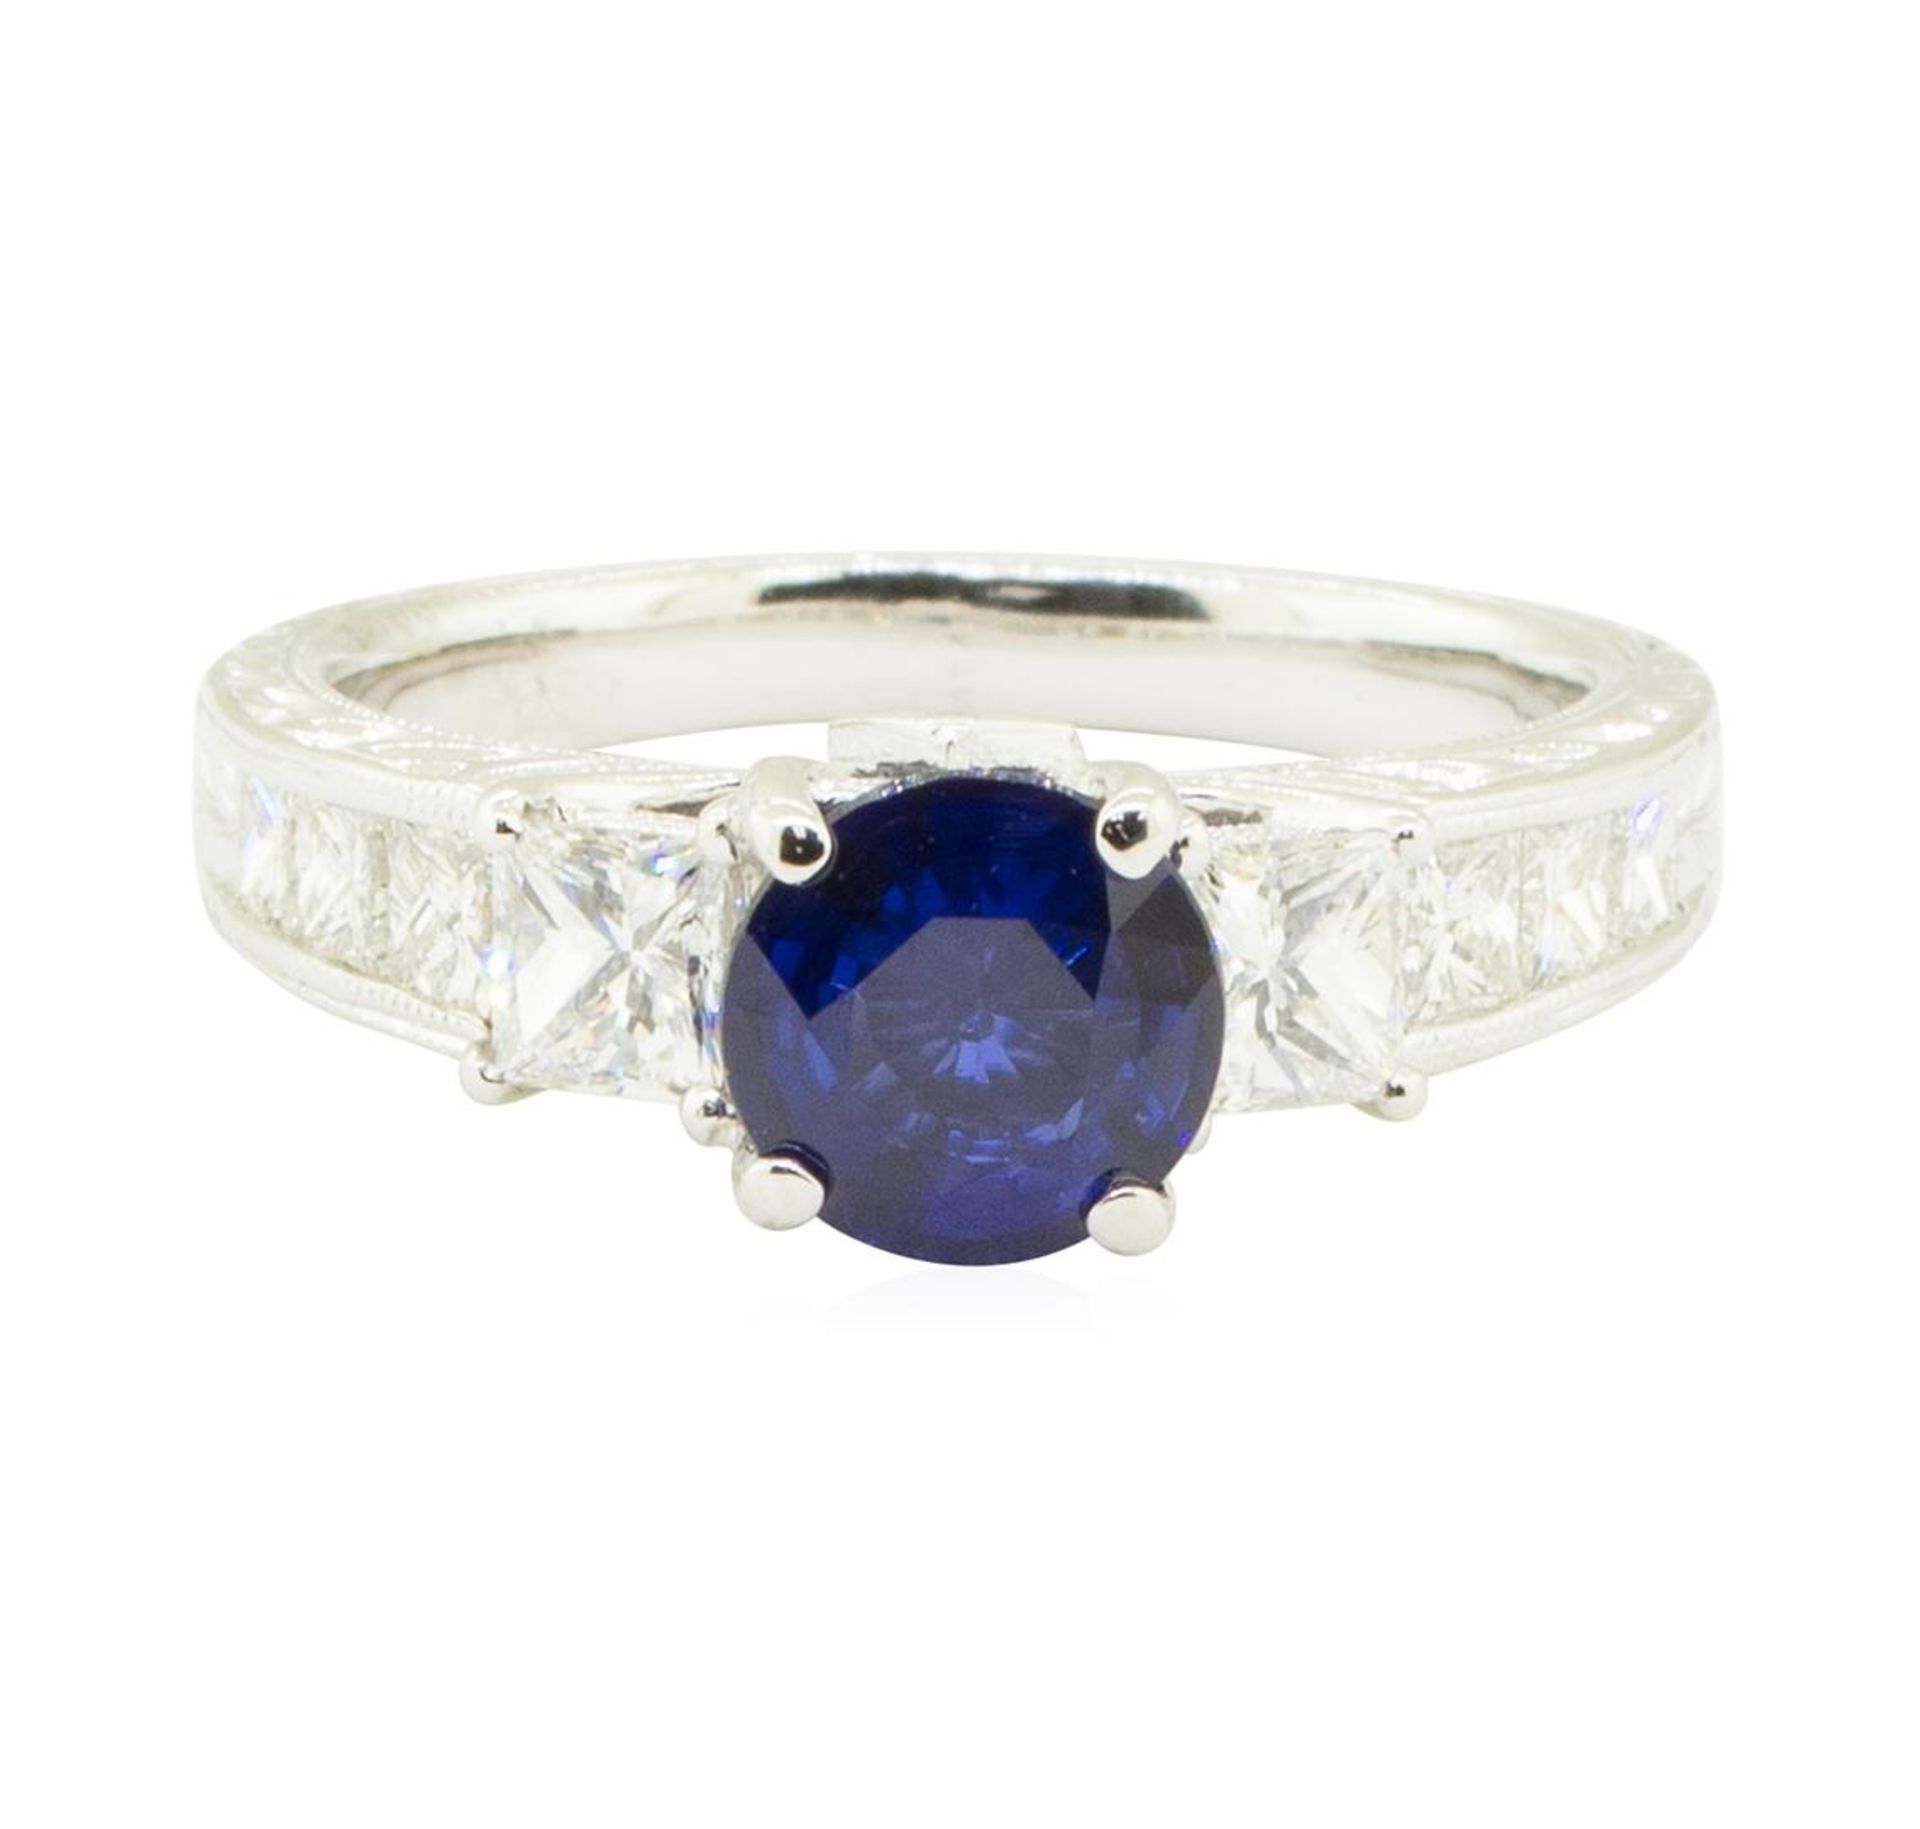 2.38 ctw Round Brilliant Blue Sapphire And Diamond Ring - 18KT White Gold - Image 2 of 5